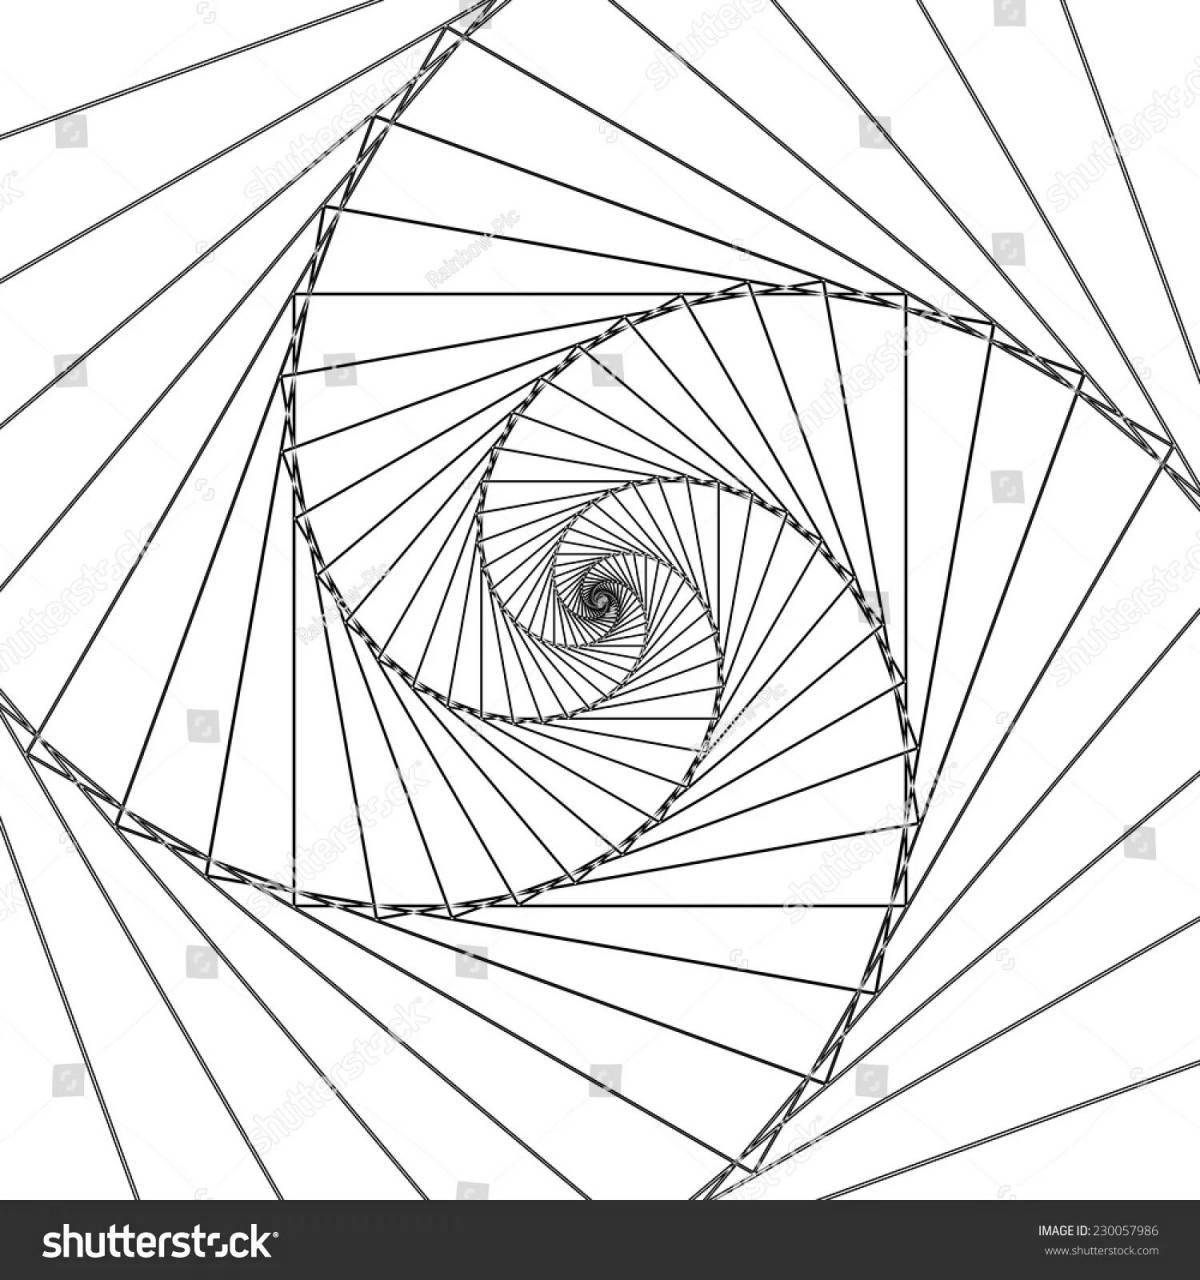 Dreamy coloring spiral pattern